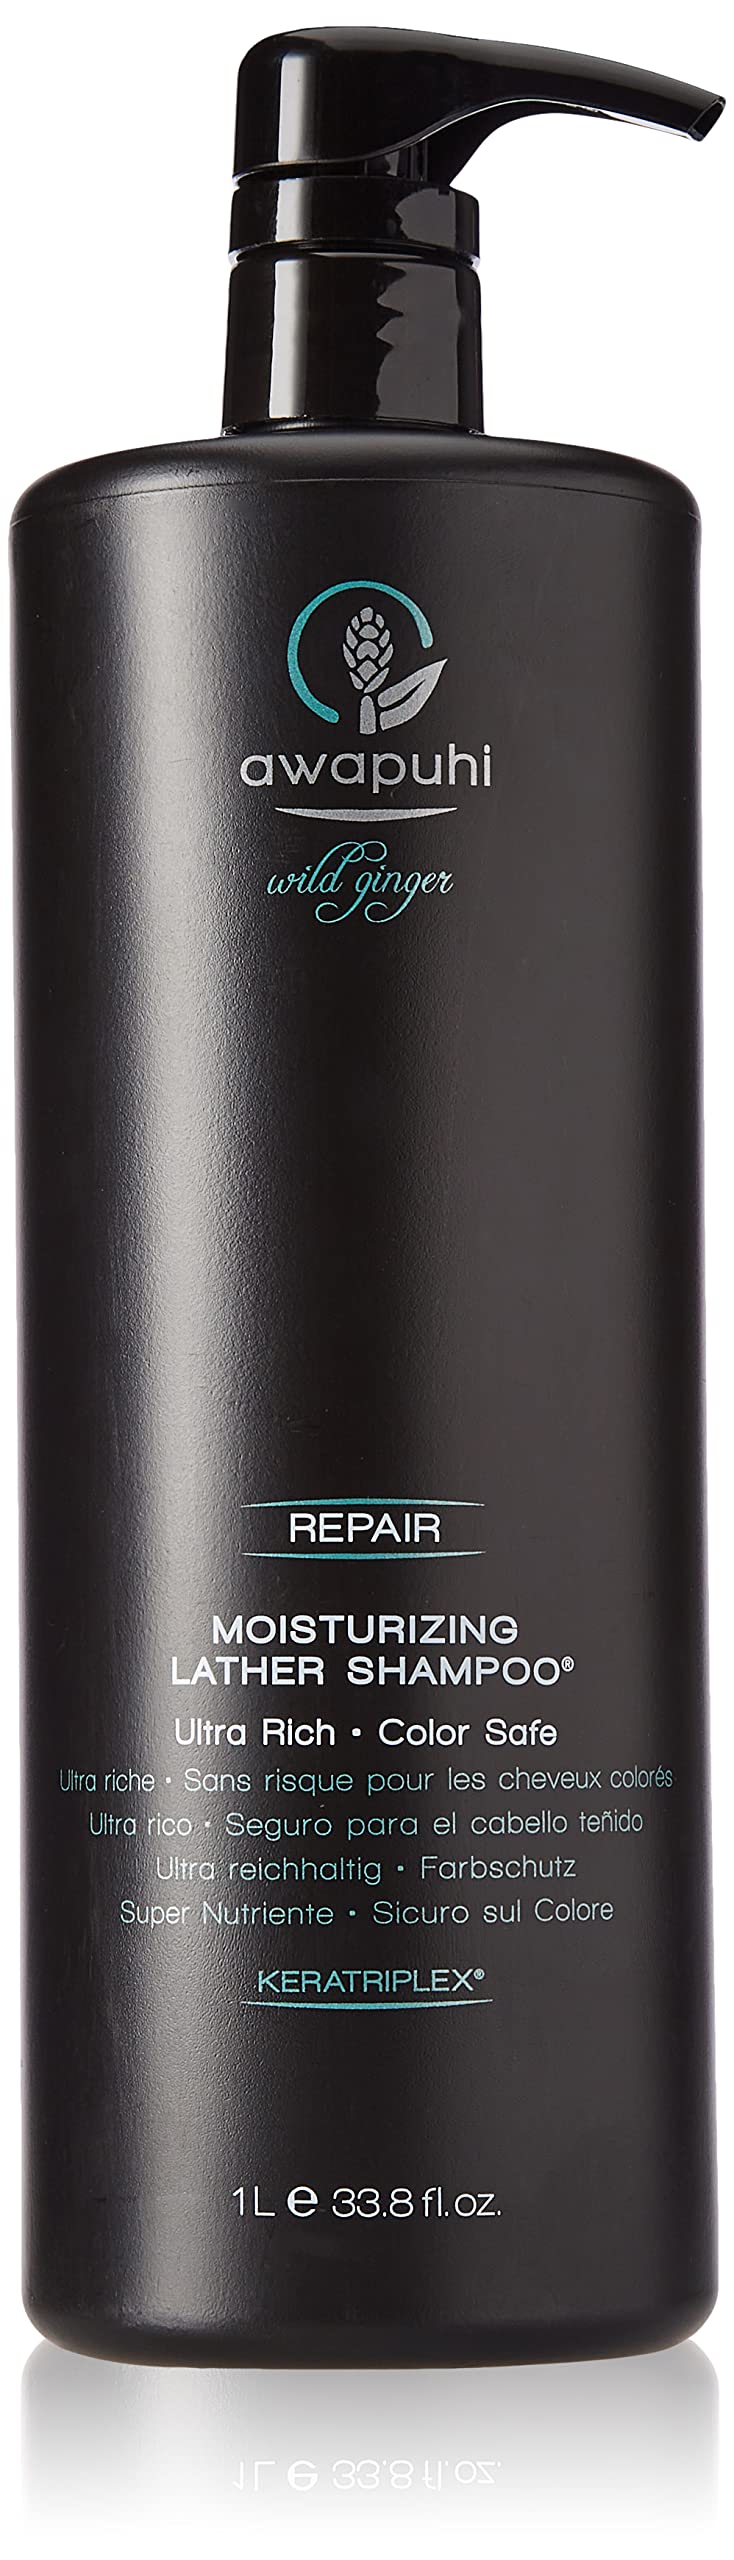 Awapuhi Wild Ginger by Paul Mitchell Nourishing Moisturizing Lather Shampoo, Ultra Rich, Color-Safe Formula, For Dry, Damaged + Color-Treated Hair